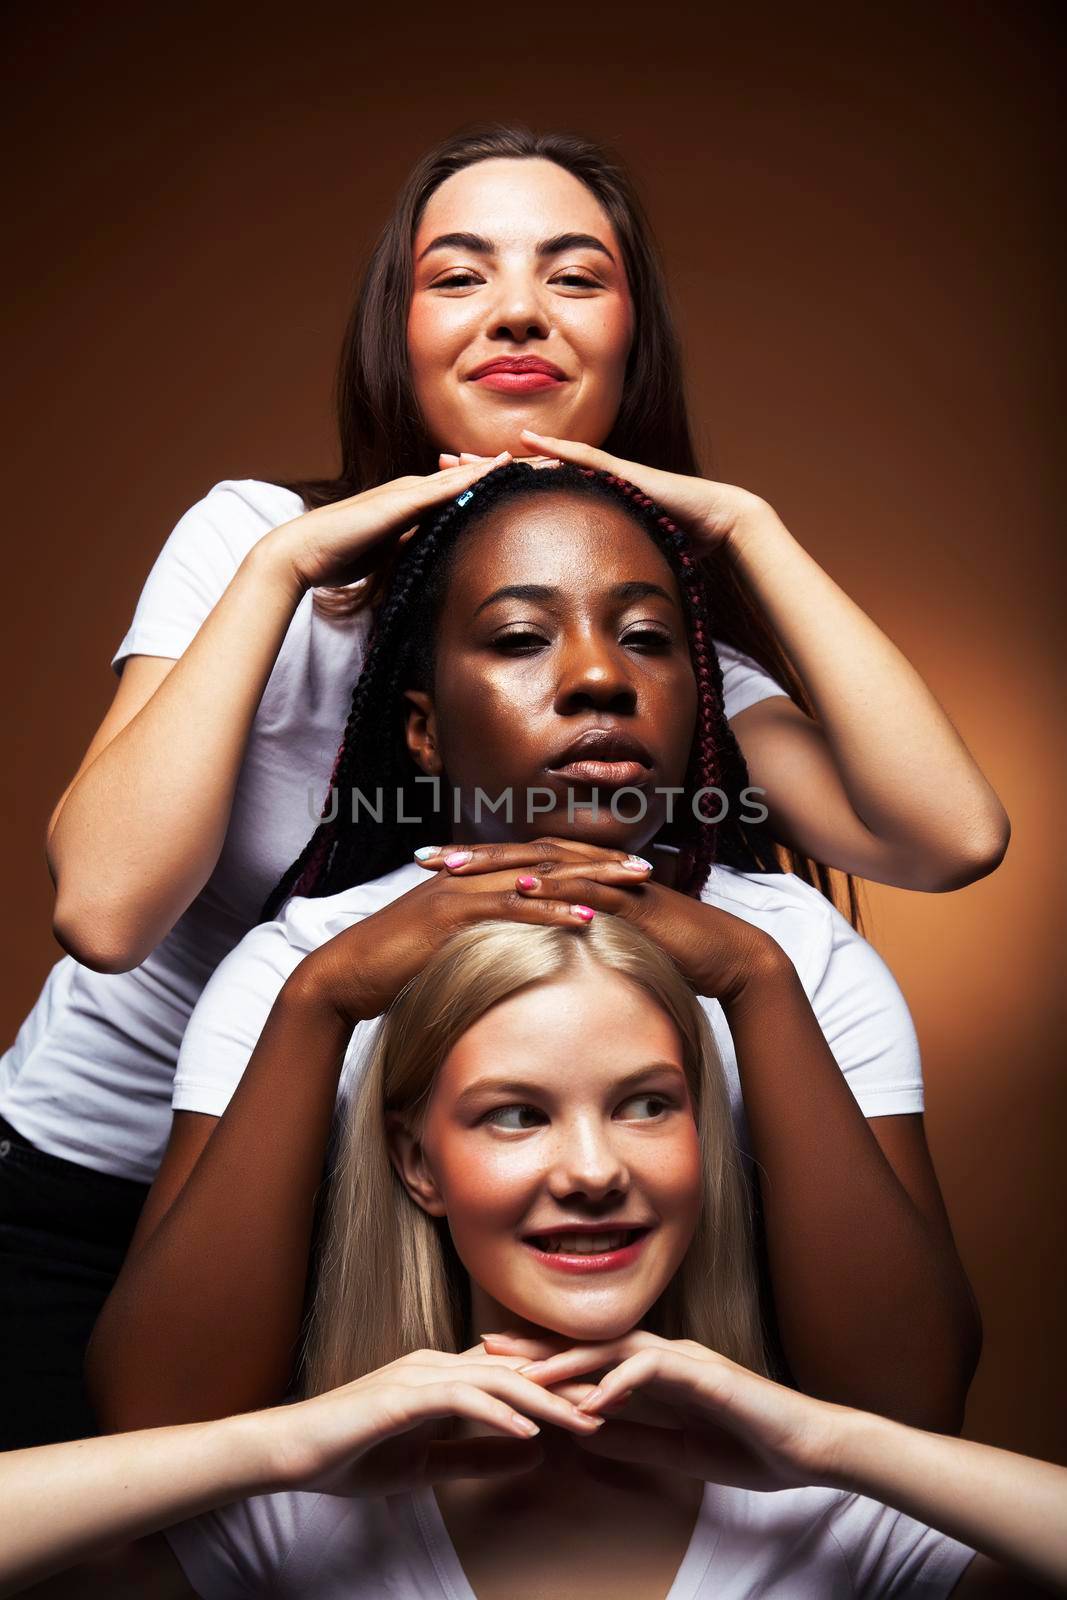 young pretty asian, caucasian, afro woman posing cheerful together on brown background, lifestyle diverse nationality people concept closeup